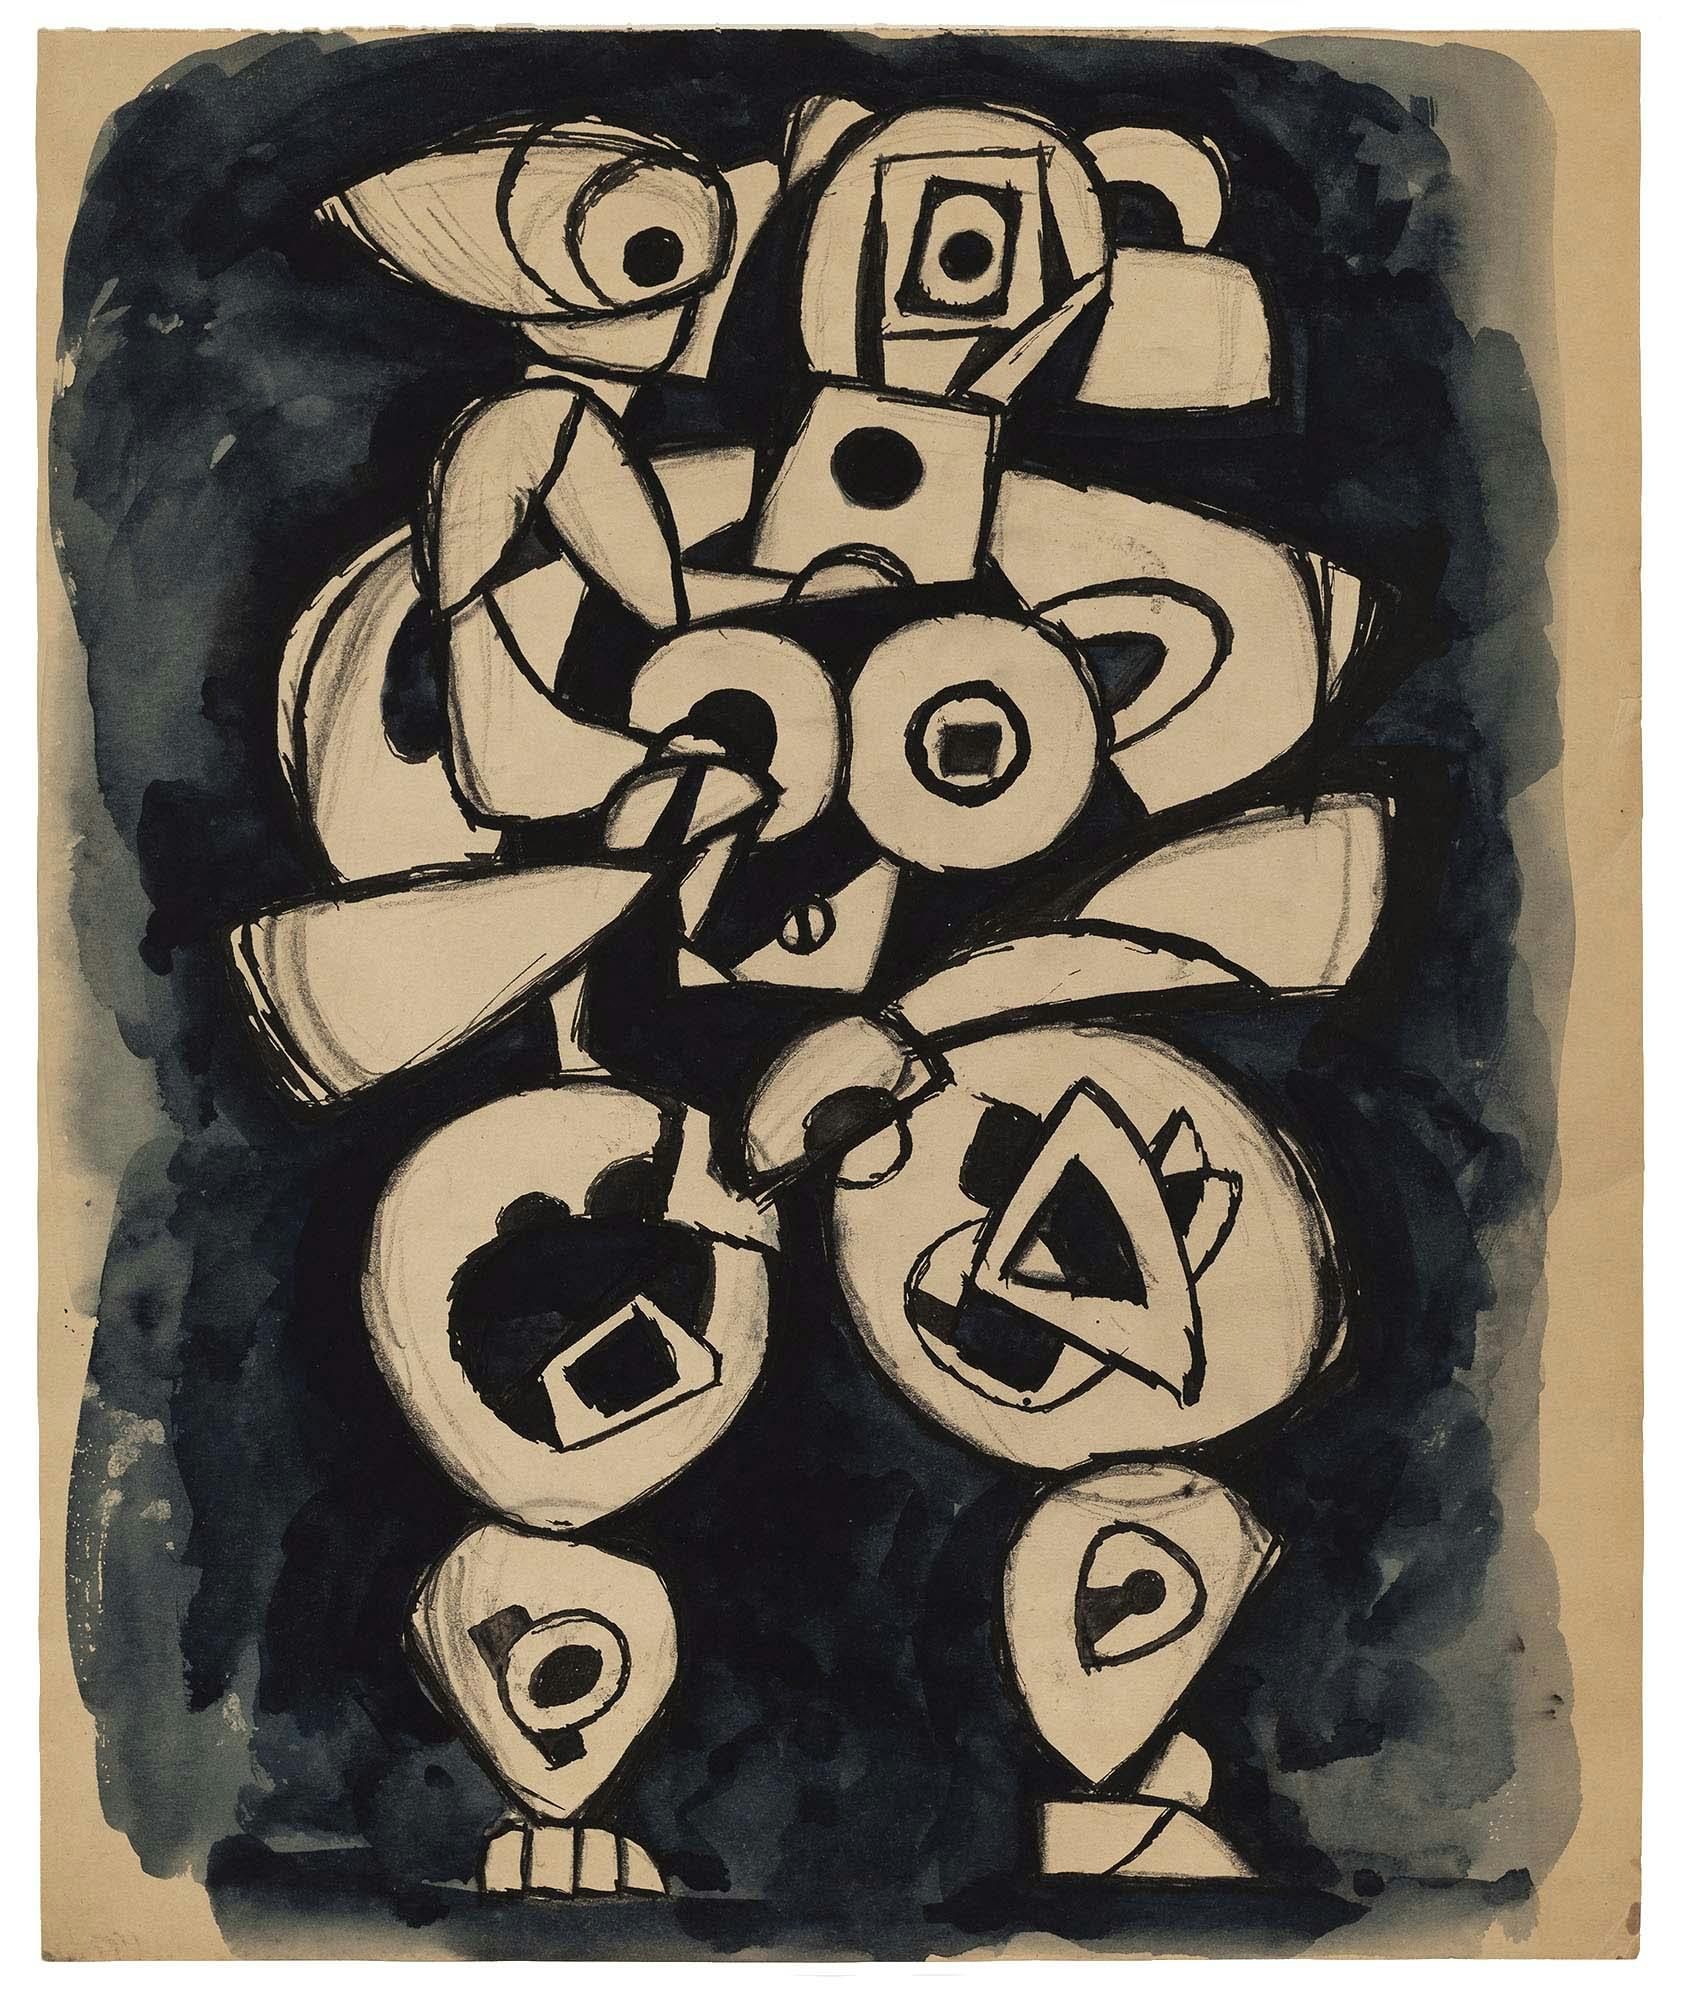 Untitled [Two Figures]
c. 1930's
Ink and crayon on paper
17 x 14 in. (43.2 x 35.6 cm)
 – The Richard Pousette-Dart Foundation